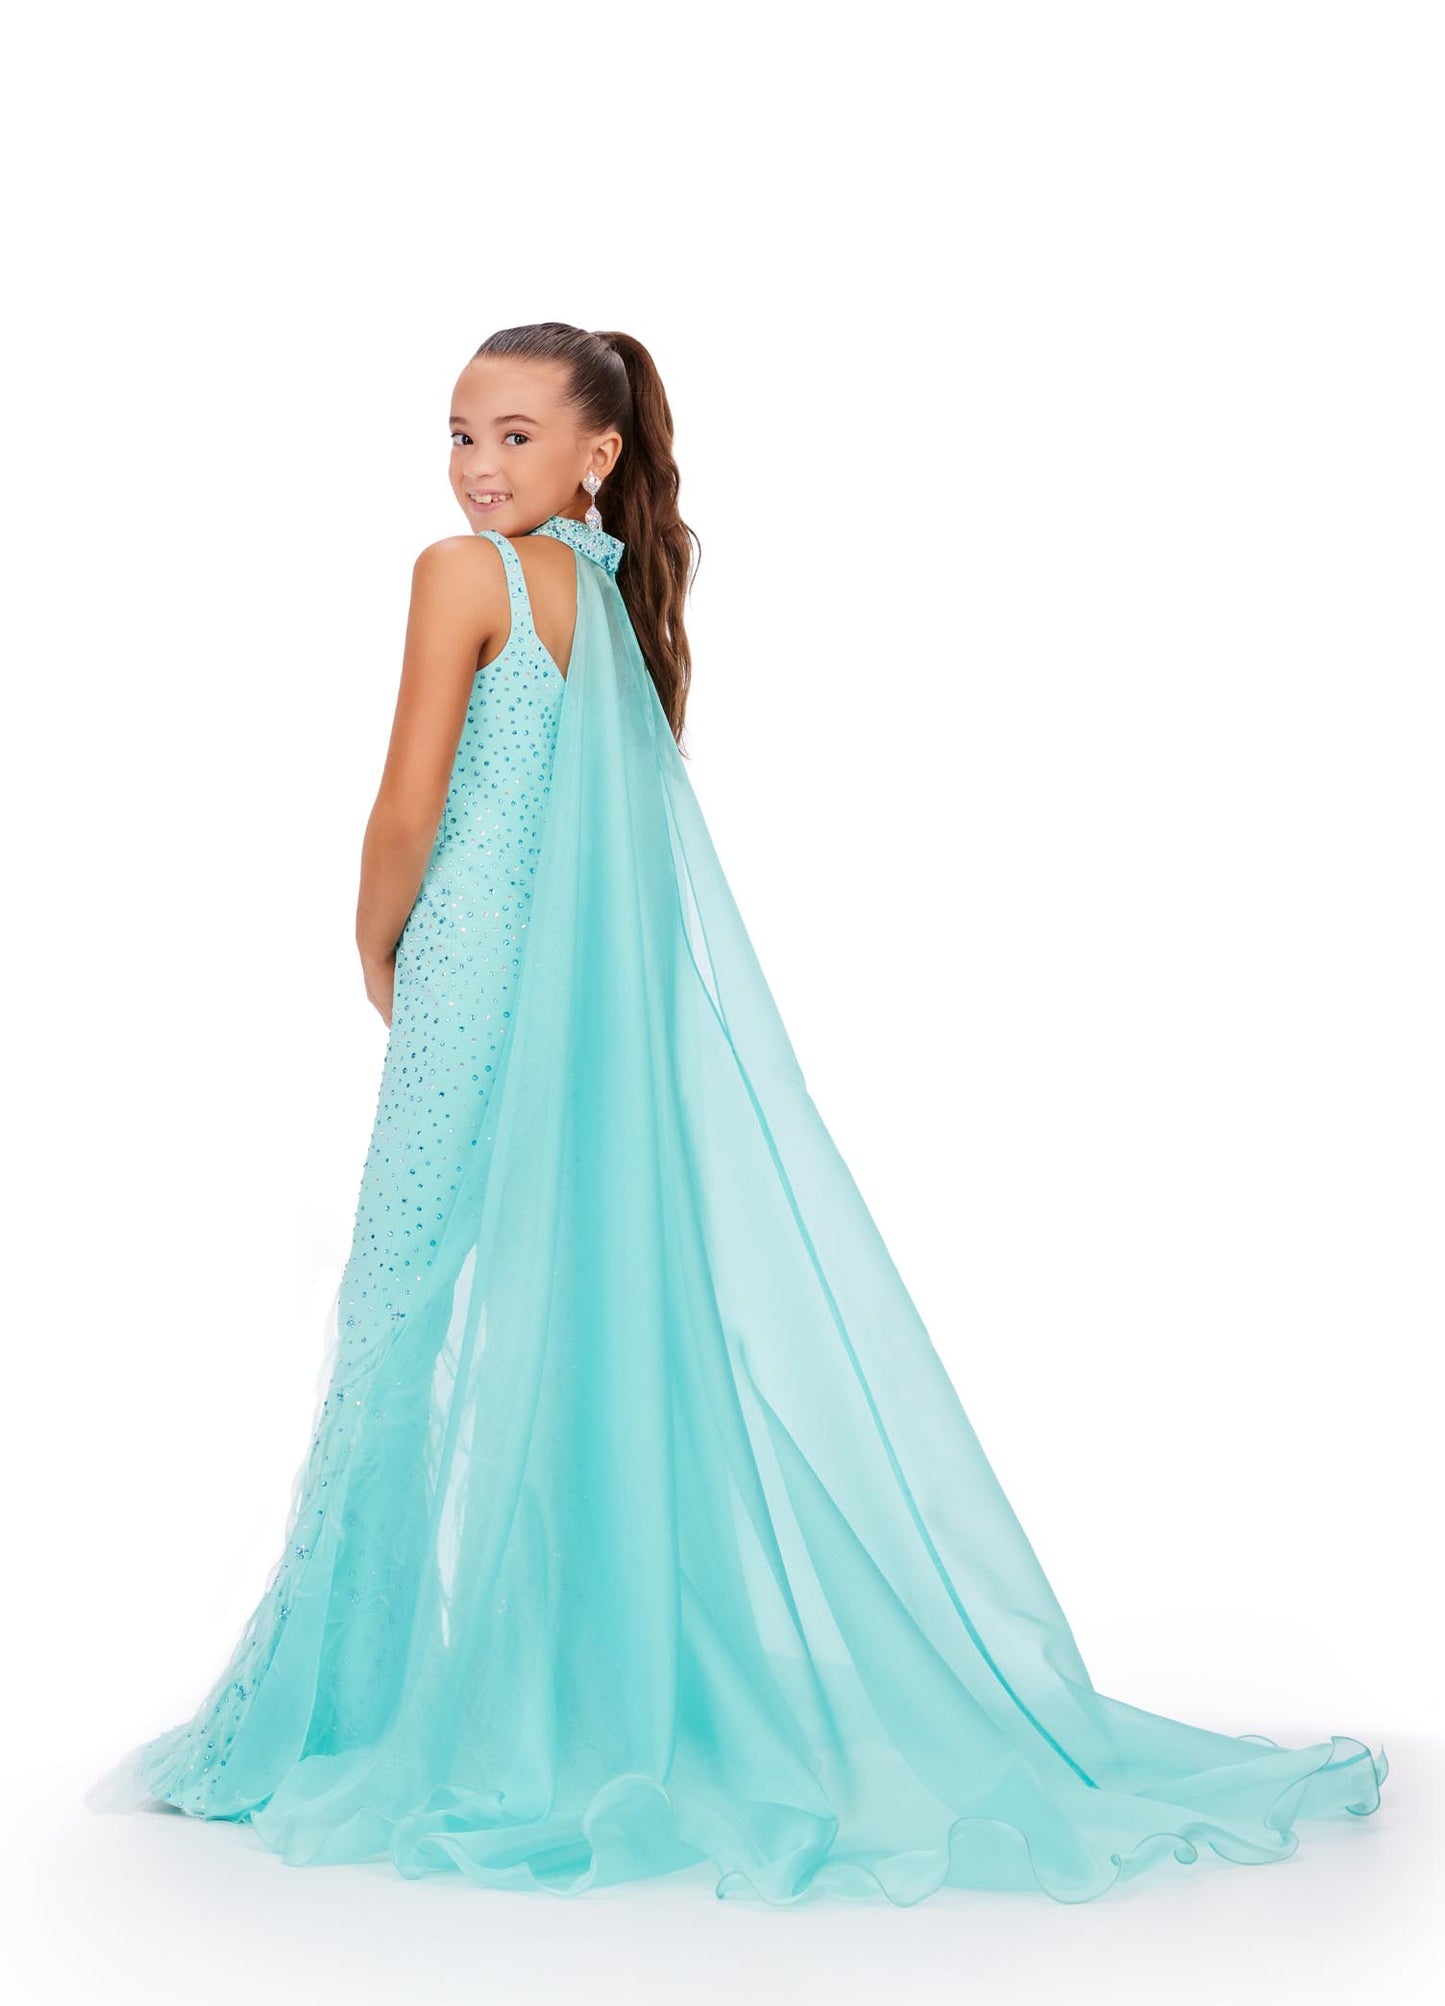 Ashley Lauren Kids 8210 Long Girls Pageant Jumpsuit with Crystal embellishements and a scoop neckline. Feather Embellished flared Bell Bottoms with a choker embellished with crystals and organza Cape.  Sizes: 12  Colors: Aqua